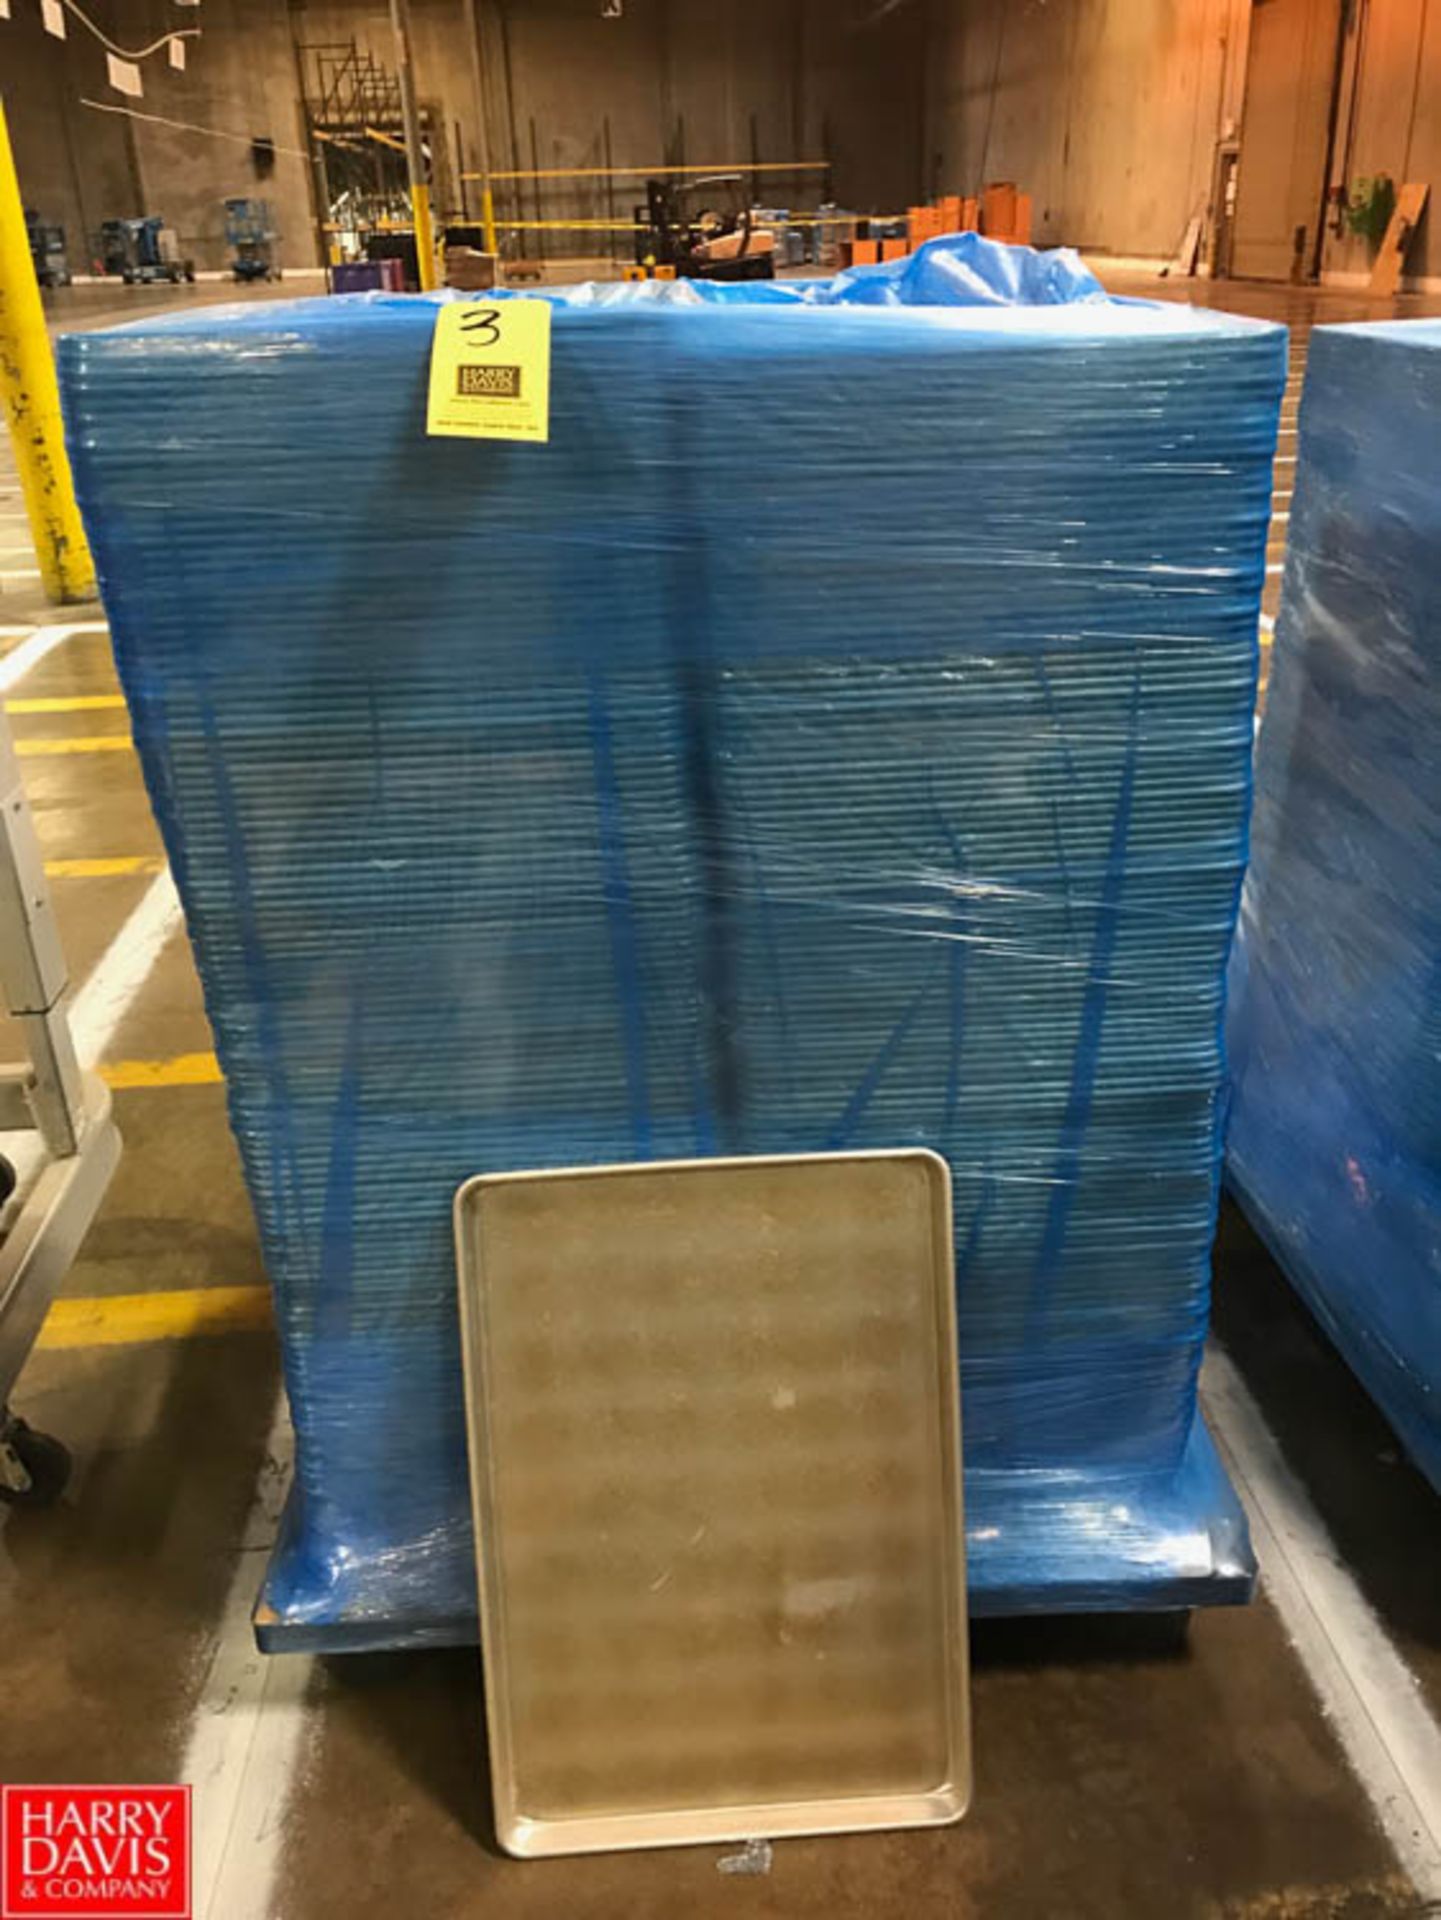 NEW American Pan Aluminum Sheet Pans , 17.75" x 26.75" Rigging Fee: 30, PLEASE NOTE: Your bids are